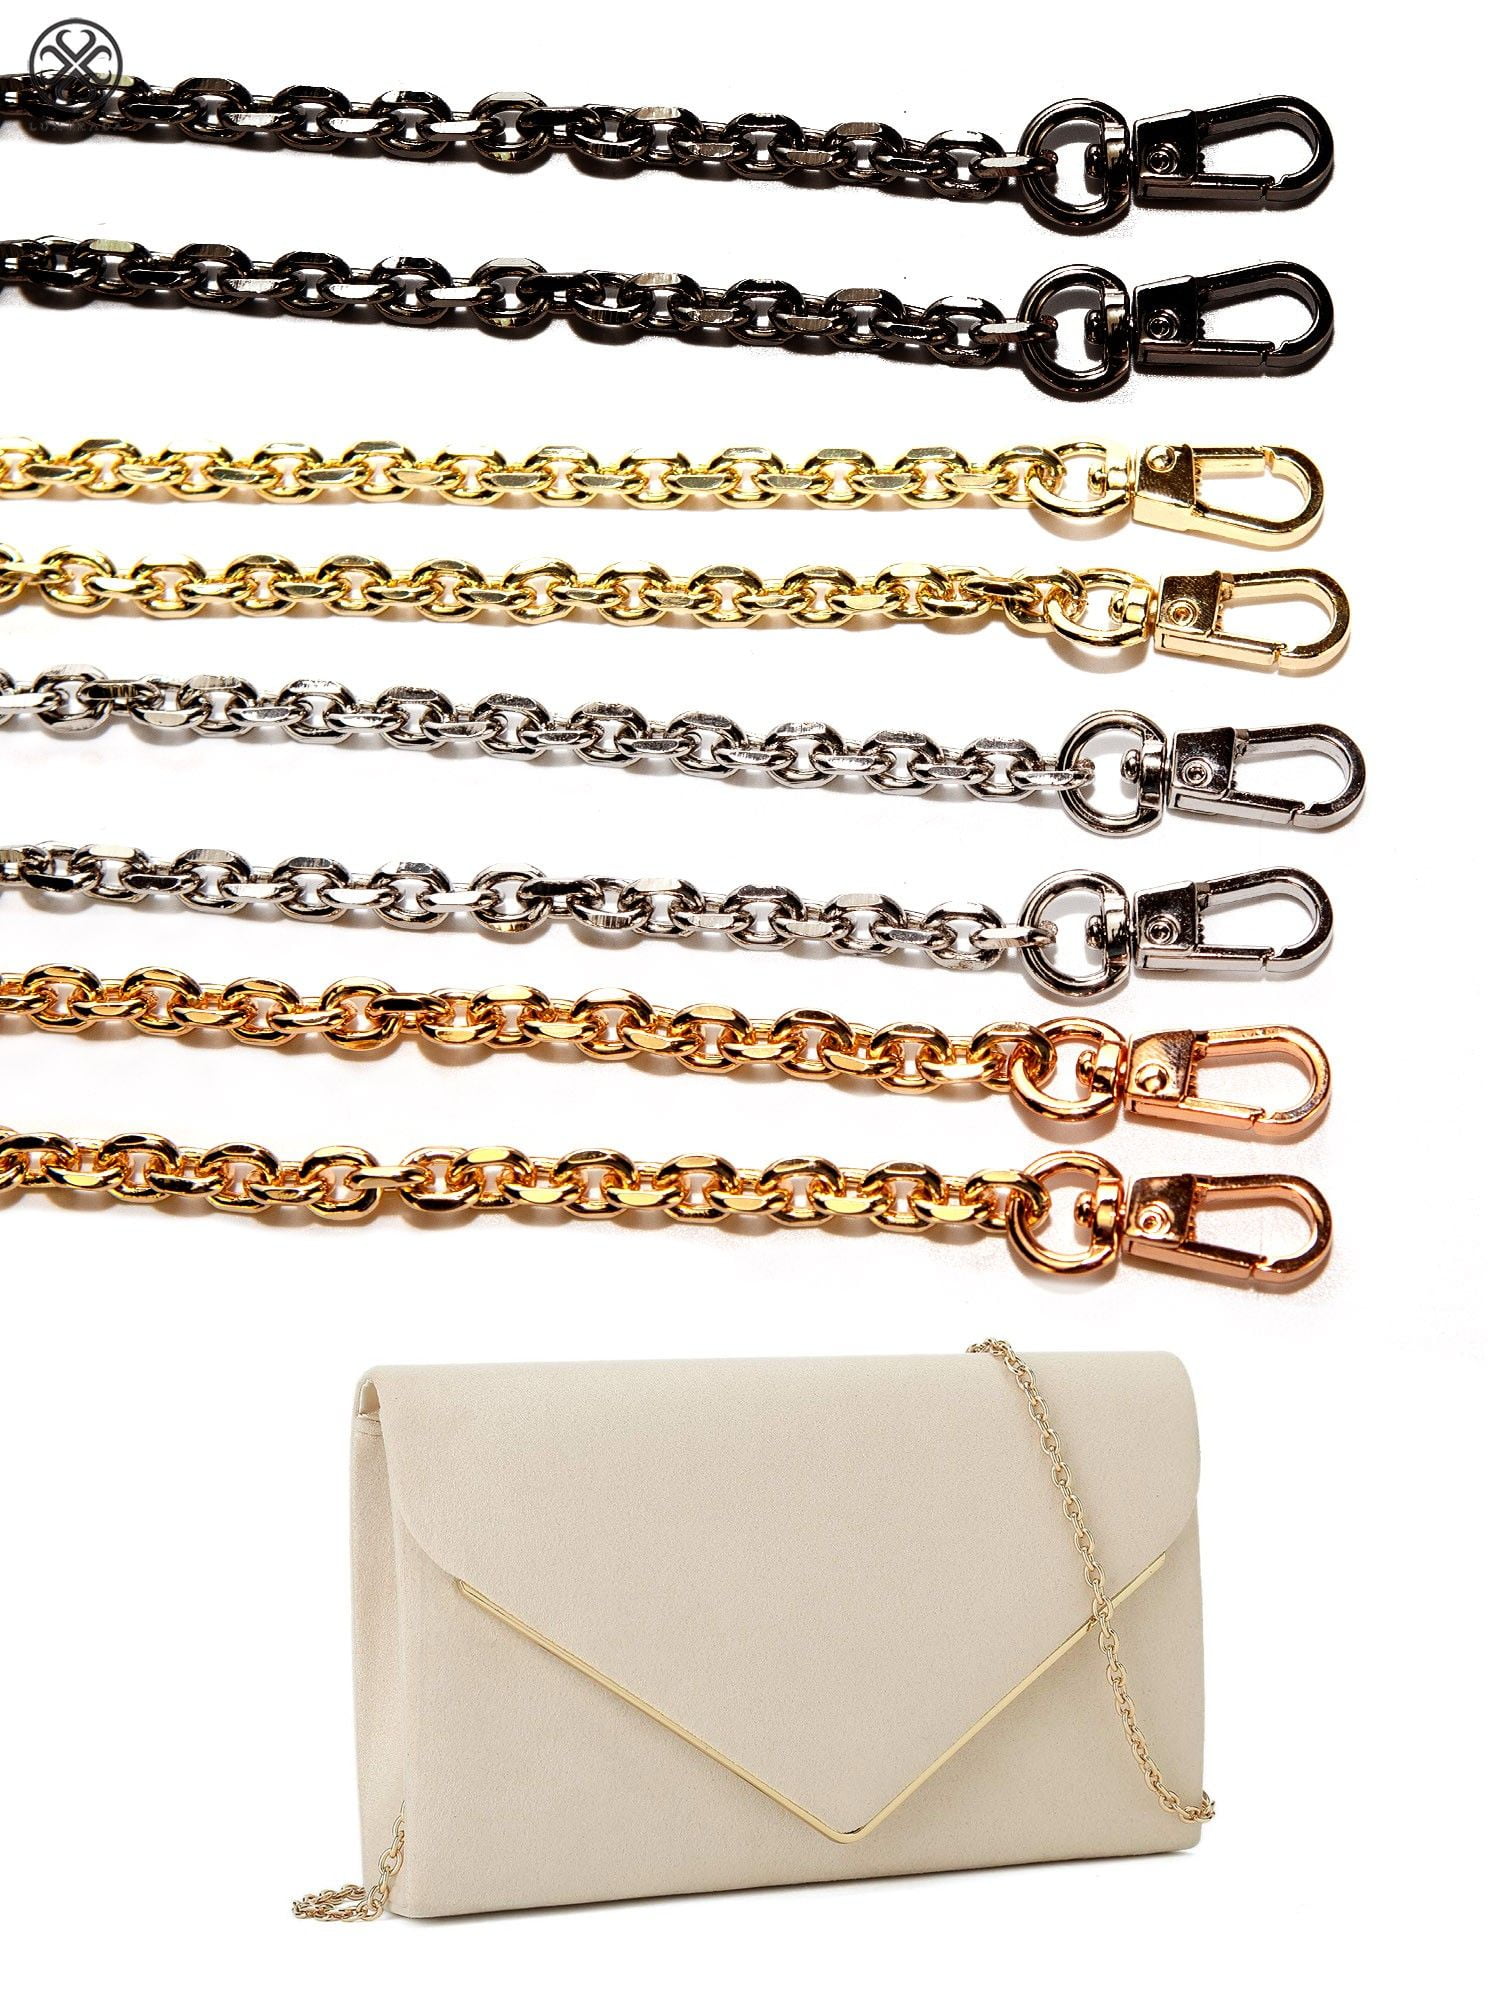 Qingsi 4 Pack Purse Chain Strap Handbags Replacement Chains for Wallet Bag Crossbody Shoulder Chain DIY Crafts 